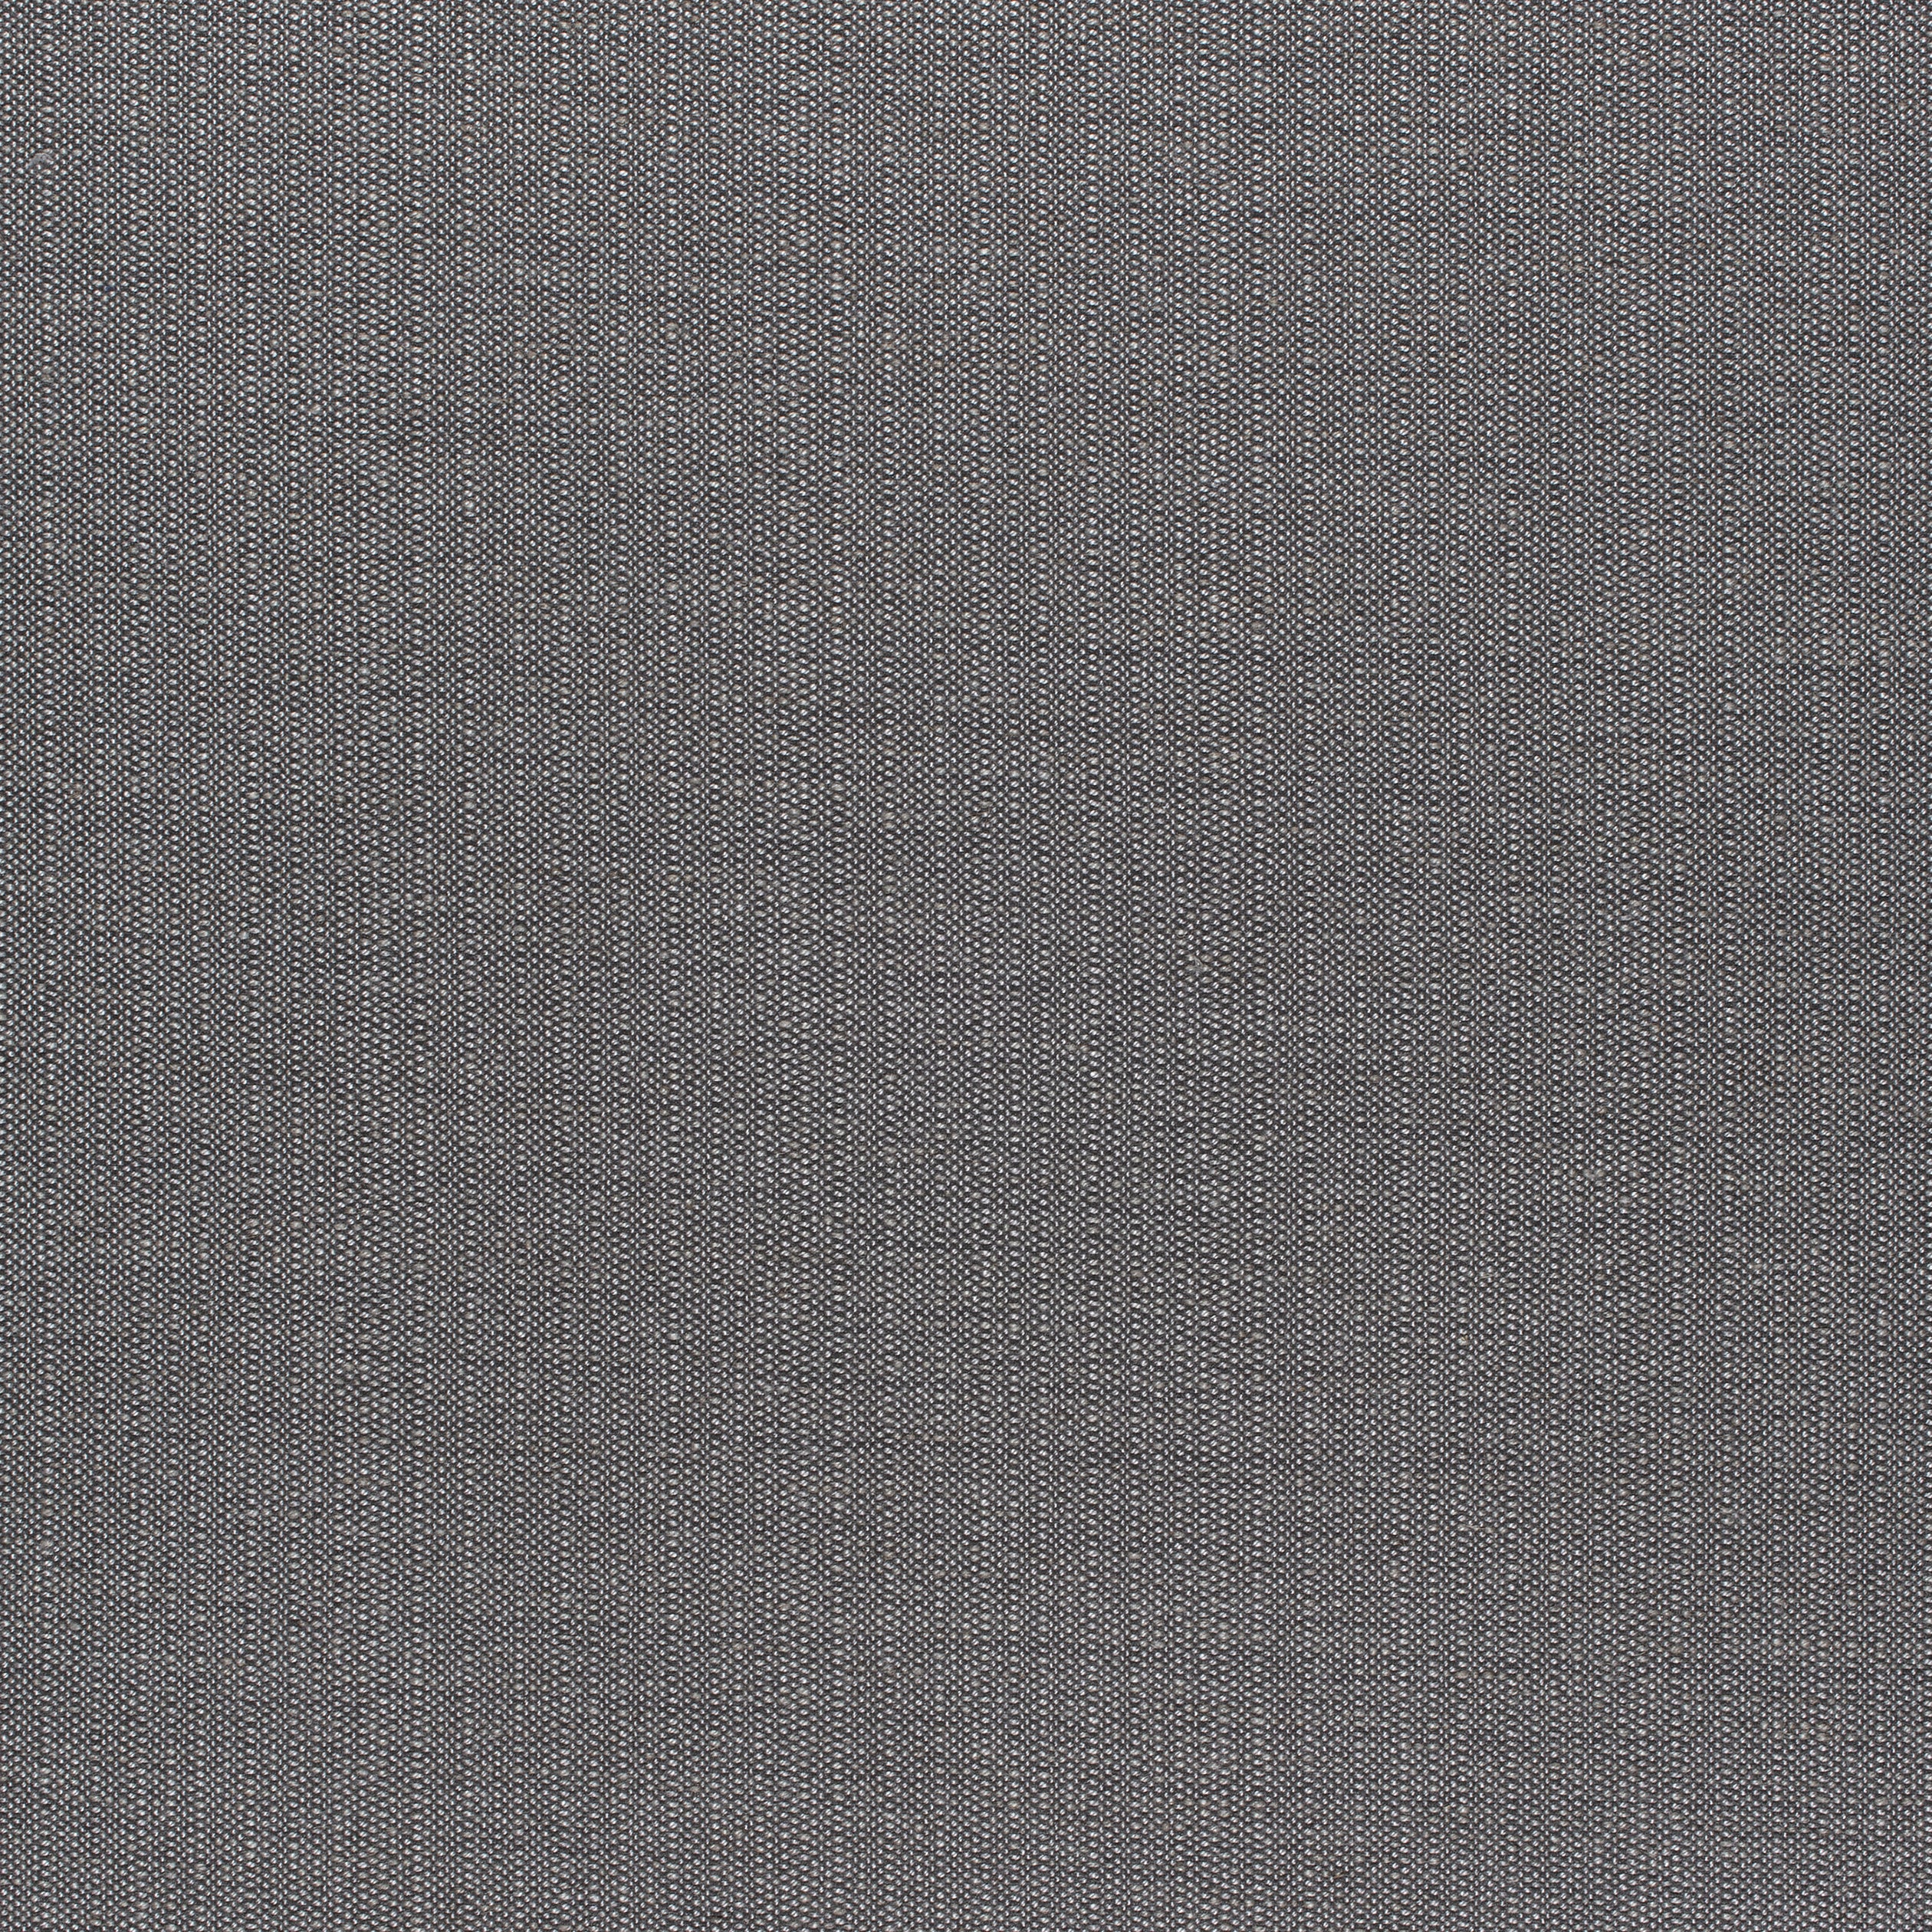 Brooks fabric in charcoal color - pattern number W73373 - by Thibaut in the Nomad collection